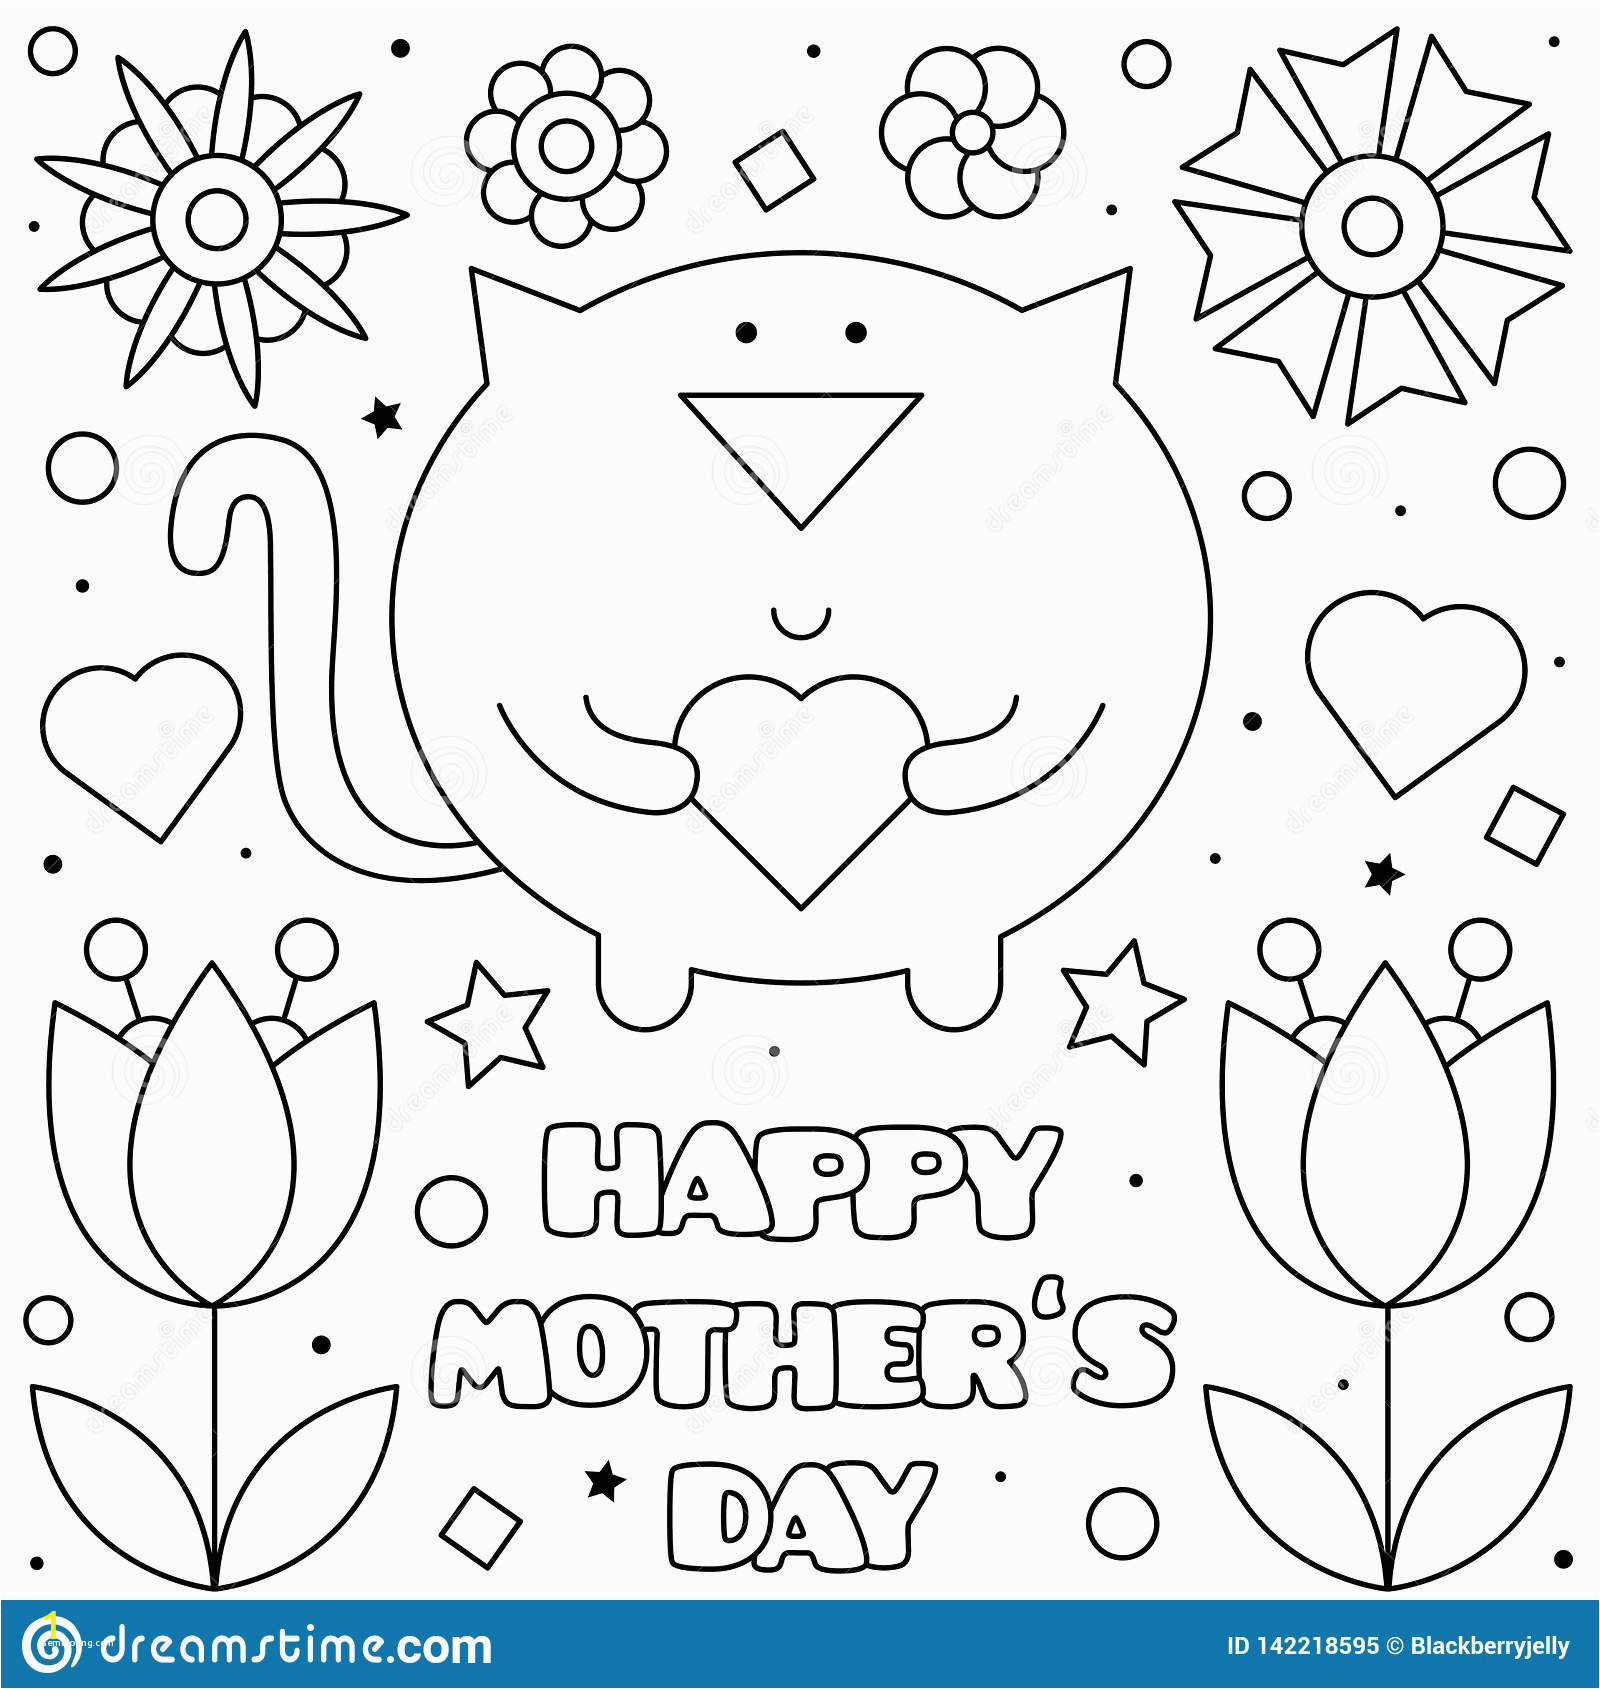 free printable love coloring pages for adults best of happy mothers day coloring page vector illustration cat of free printable love coloring pages for adults